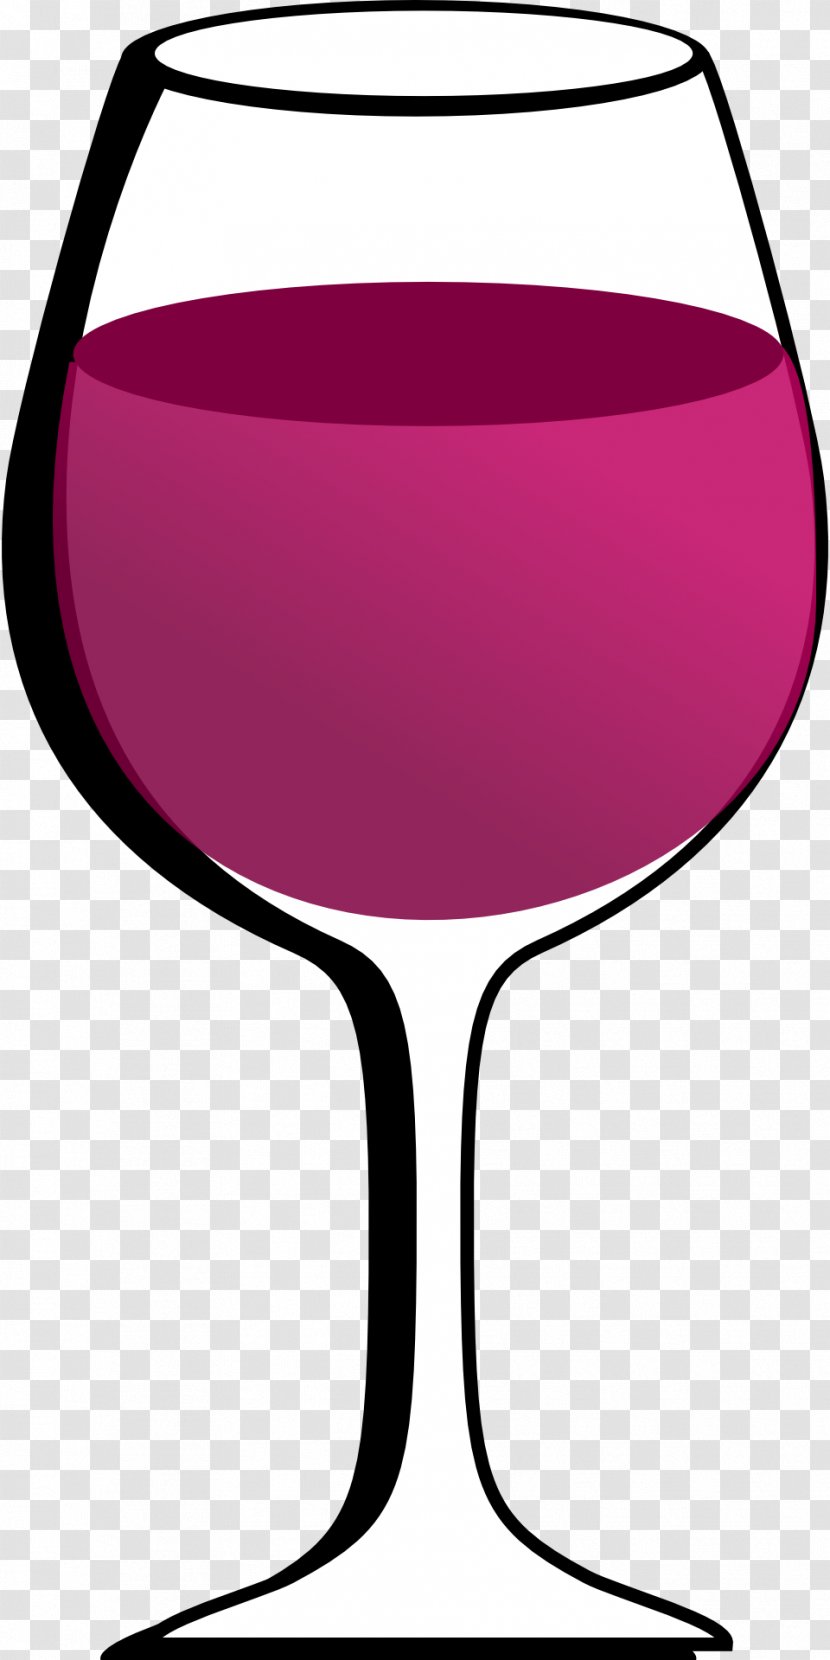 Wine Glass Champagne Clip Art - Drink Transparent PNG